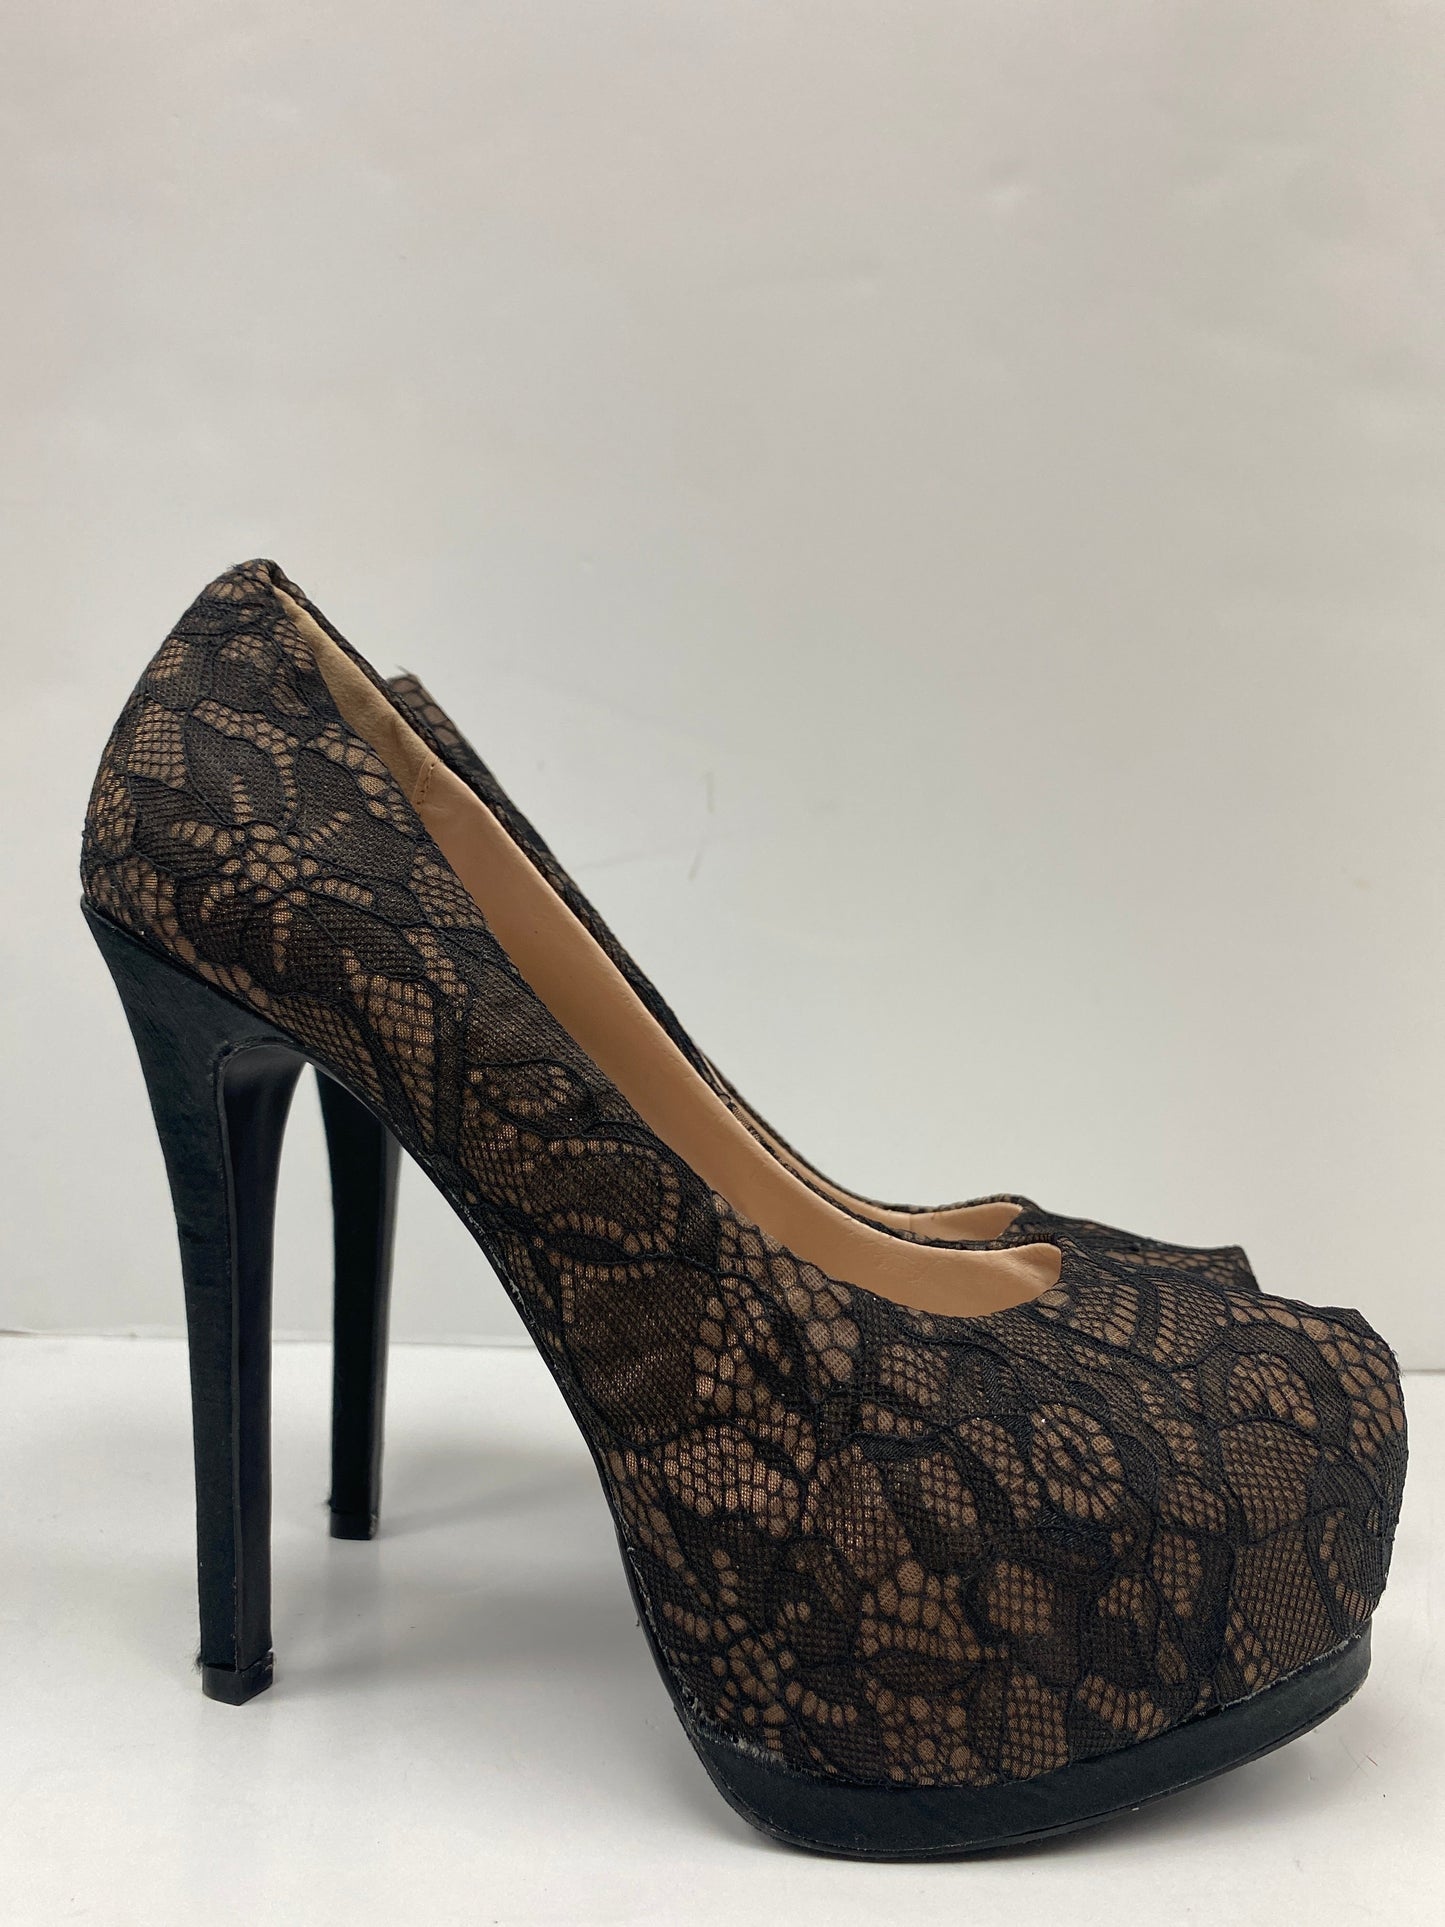 Shoes Heels Stiletto By Clothes Mentor  Size: 9